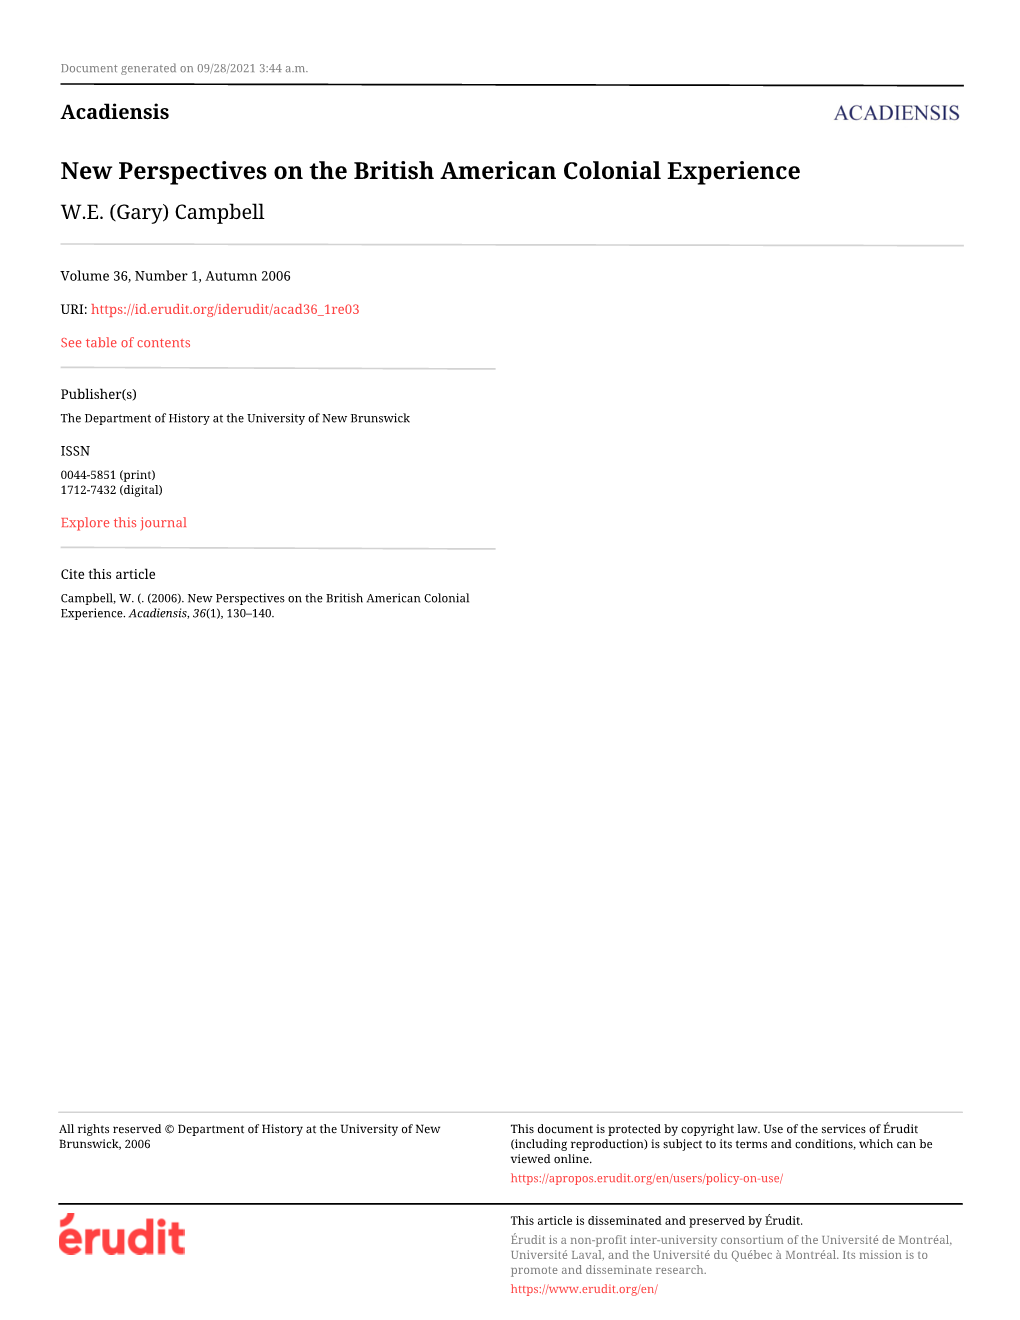 New Perspectives on the British American Colonial Experience W.E